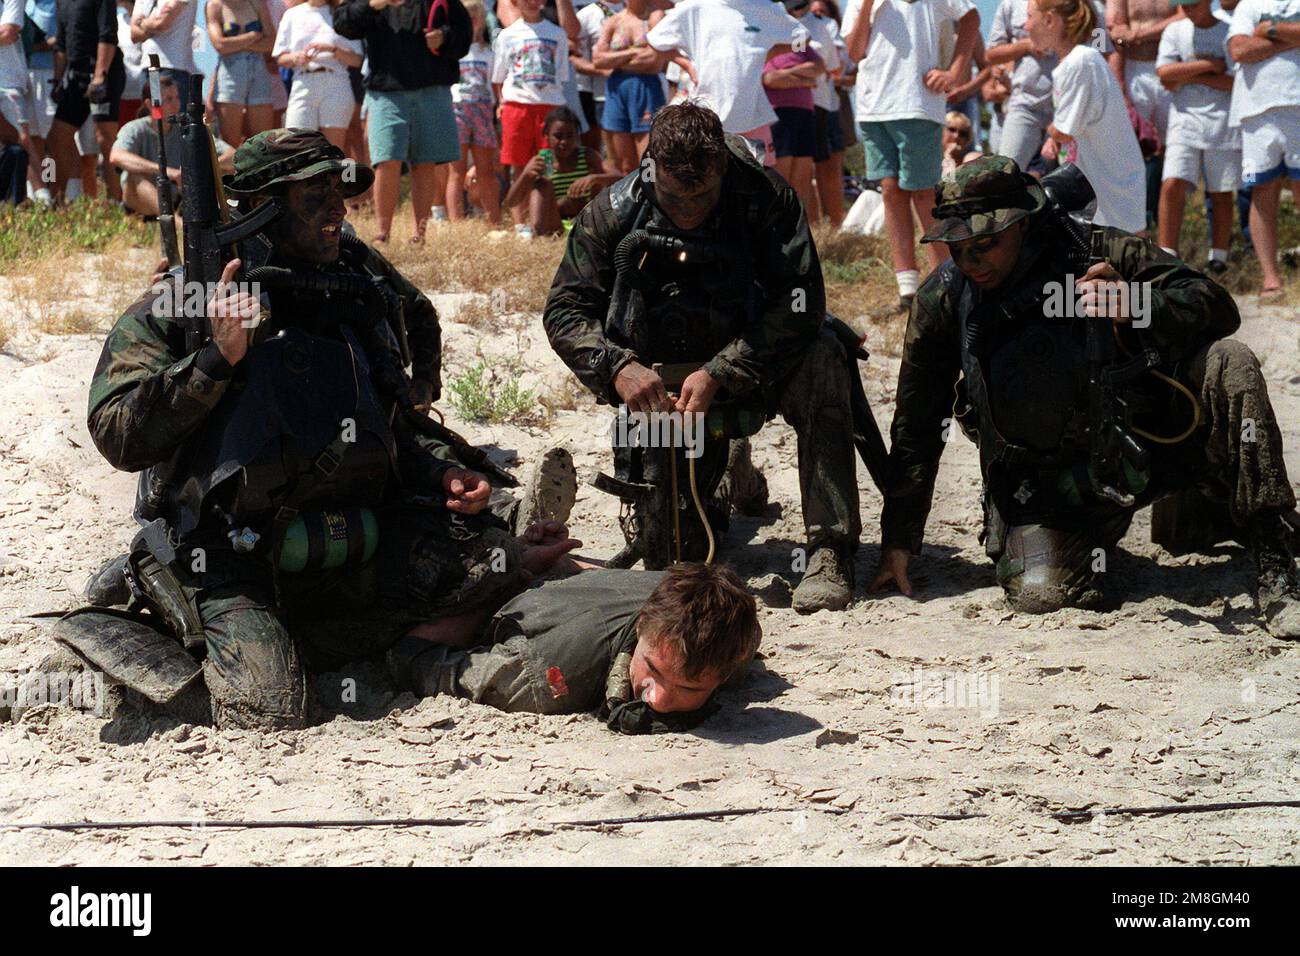 Members of a U.S. Navy Sea-Air-Land (SEAL) team secure a prisoner during a public demonstration. The SEALs are armed with 9mm MP5 sub-machine guns. Base: Coronado State: California (CA) Country: United States Of America (USA) Stock Photo